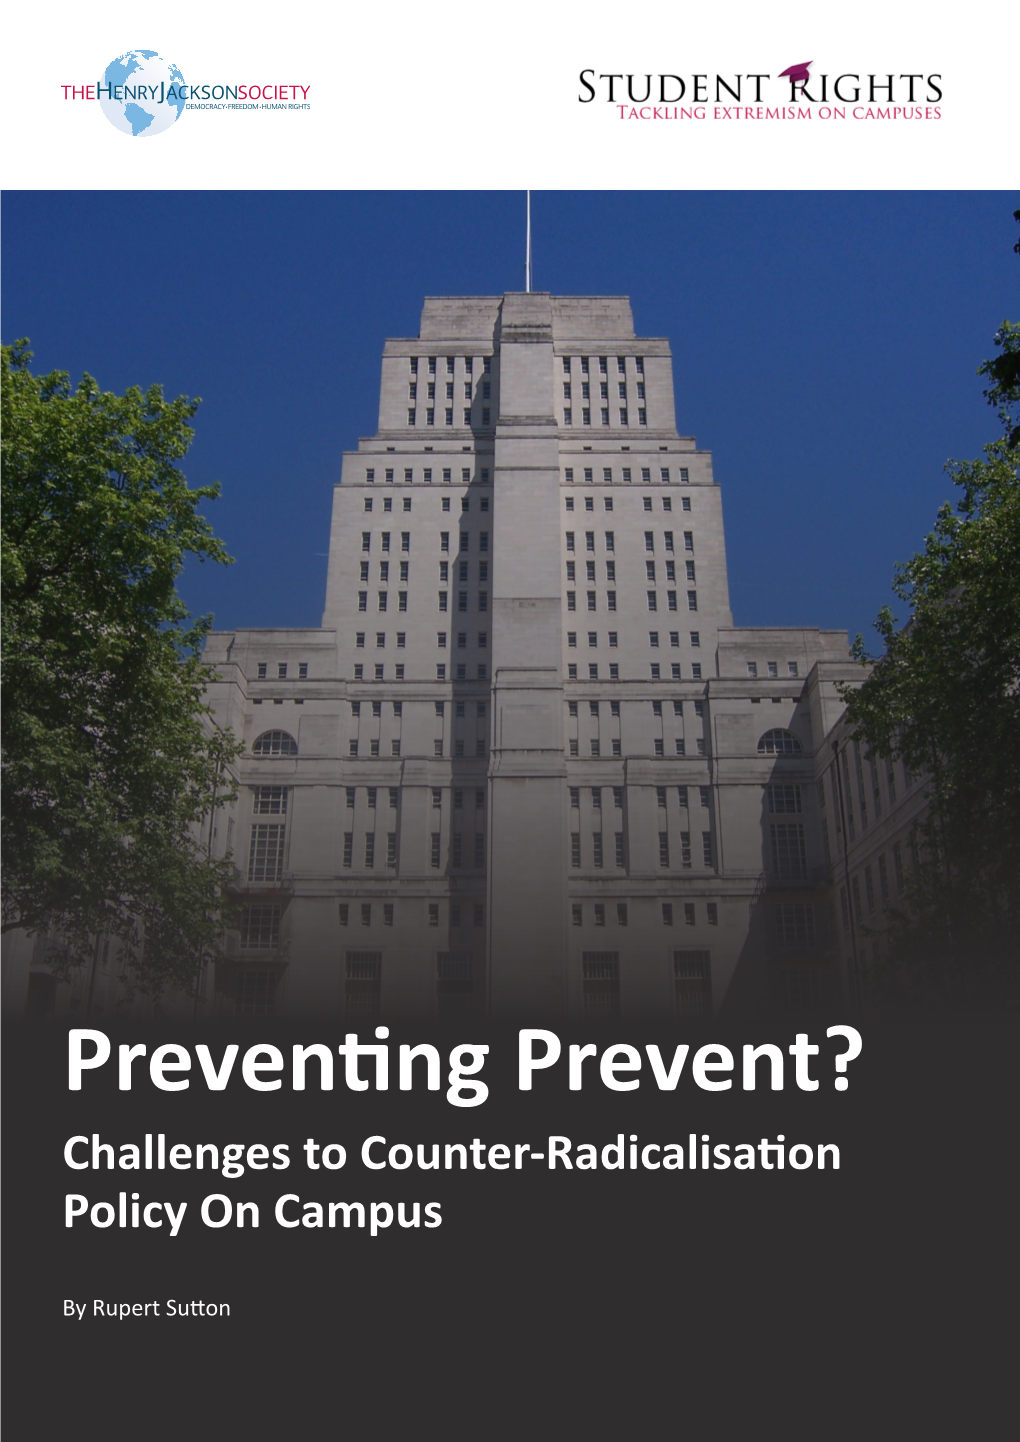 Preventing Prevent? Challenges to Counter-Radicalisation Policy on Campus